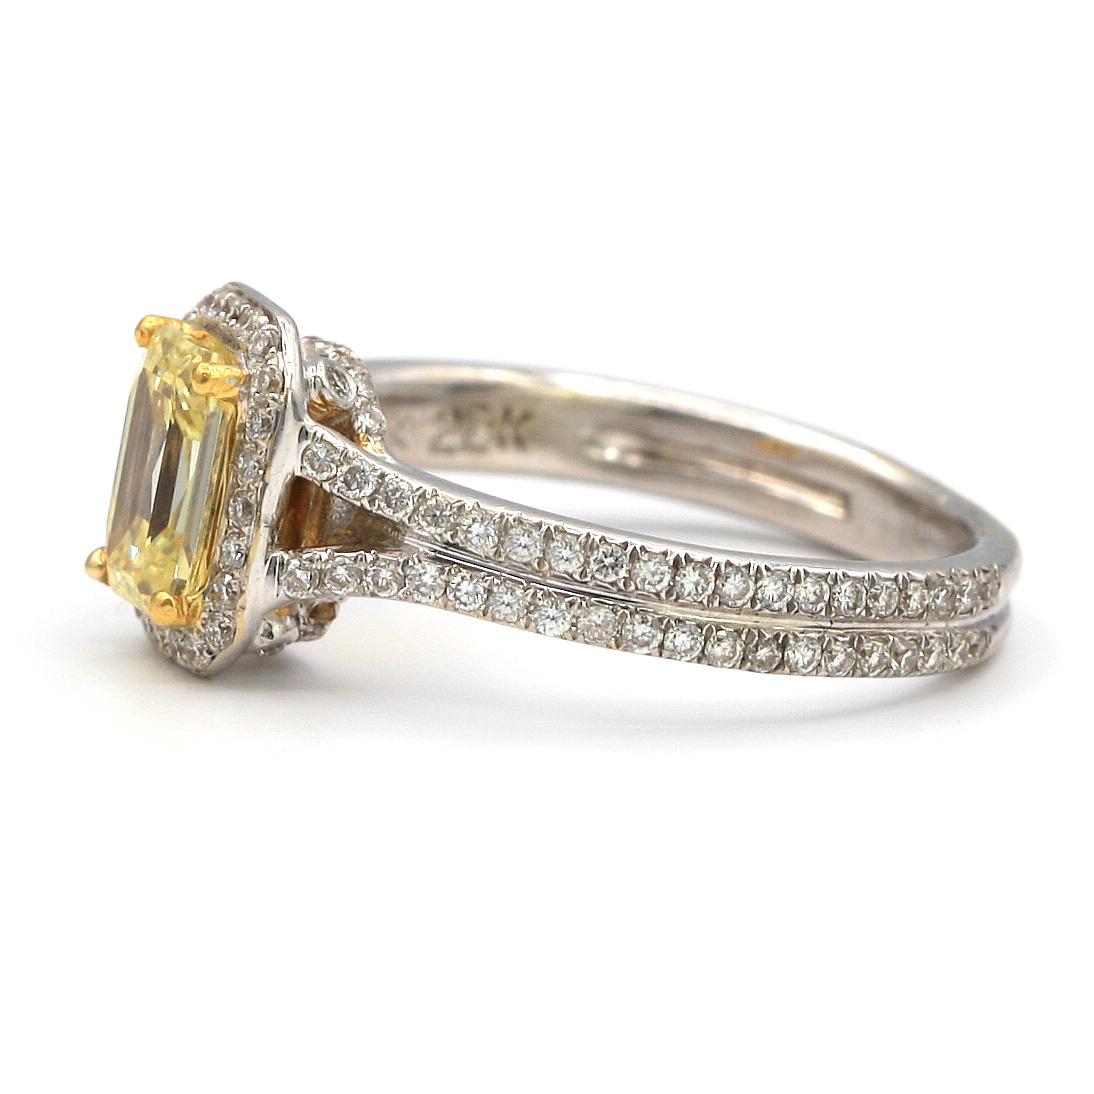 This 0.73 carat Fancy Yellow Emerald shaped diamond, surrounded by 0.45 carat pave white diamonds.
Mounted in 18K/22K White Gold/Yellow Gold
 
ring size 5.5